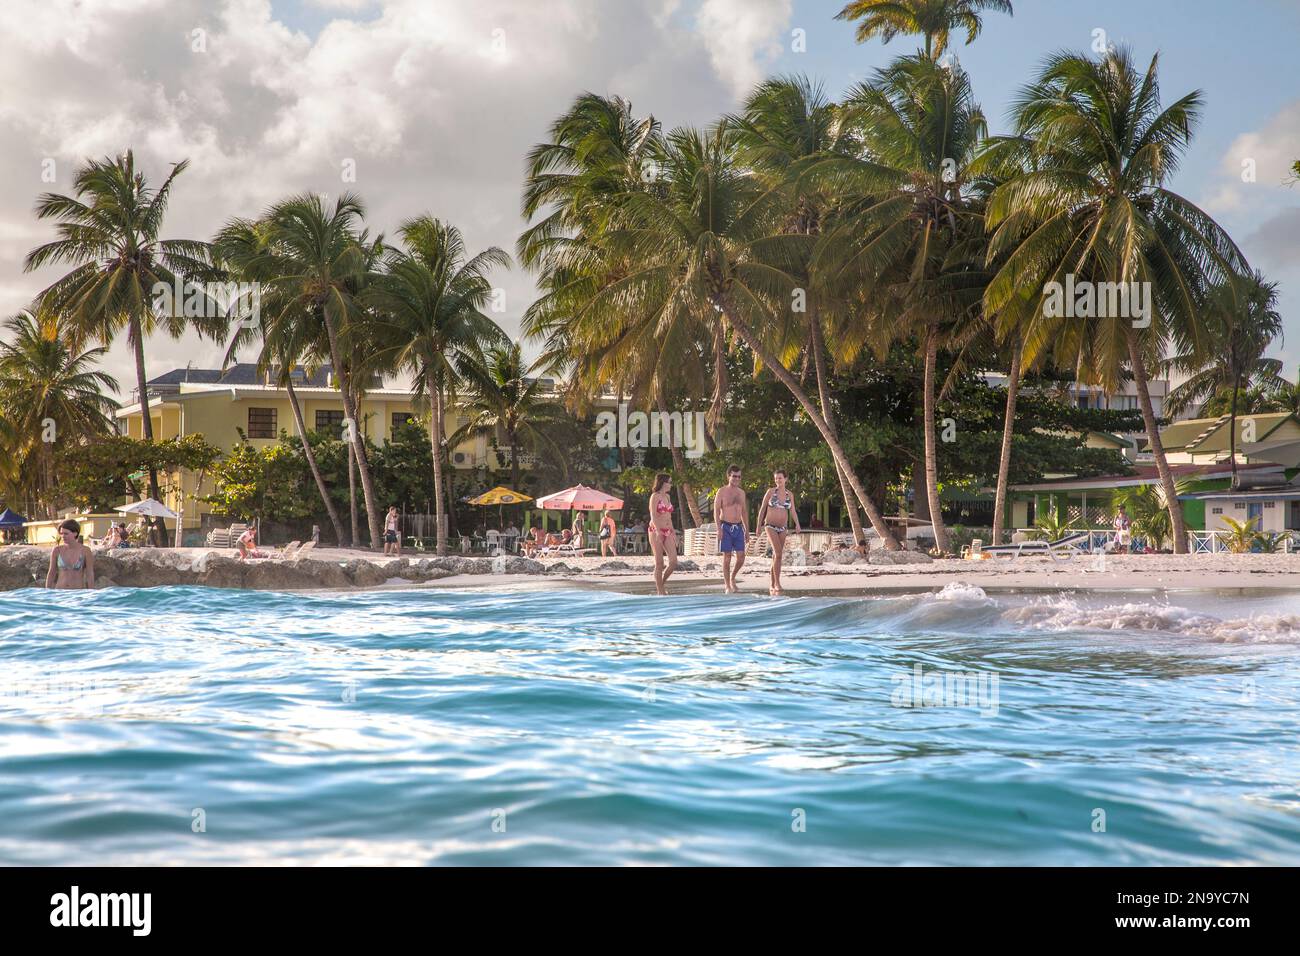 Tourists enjoy a tropical beach at the small village of Worthing, Barbados; Worthing, Barbados Stock Photo